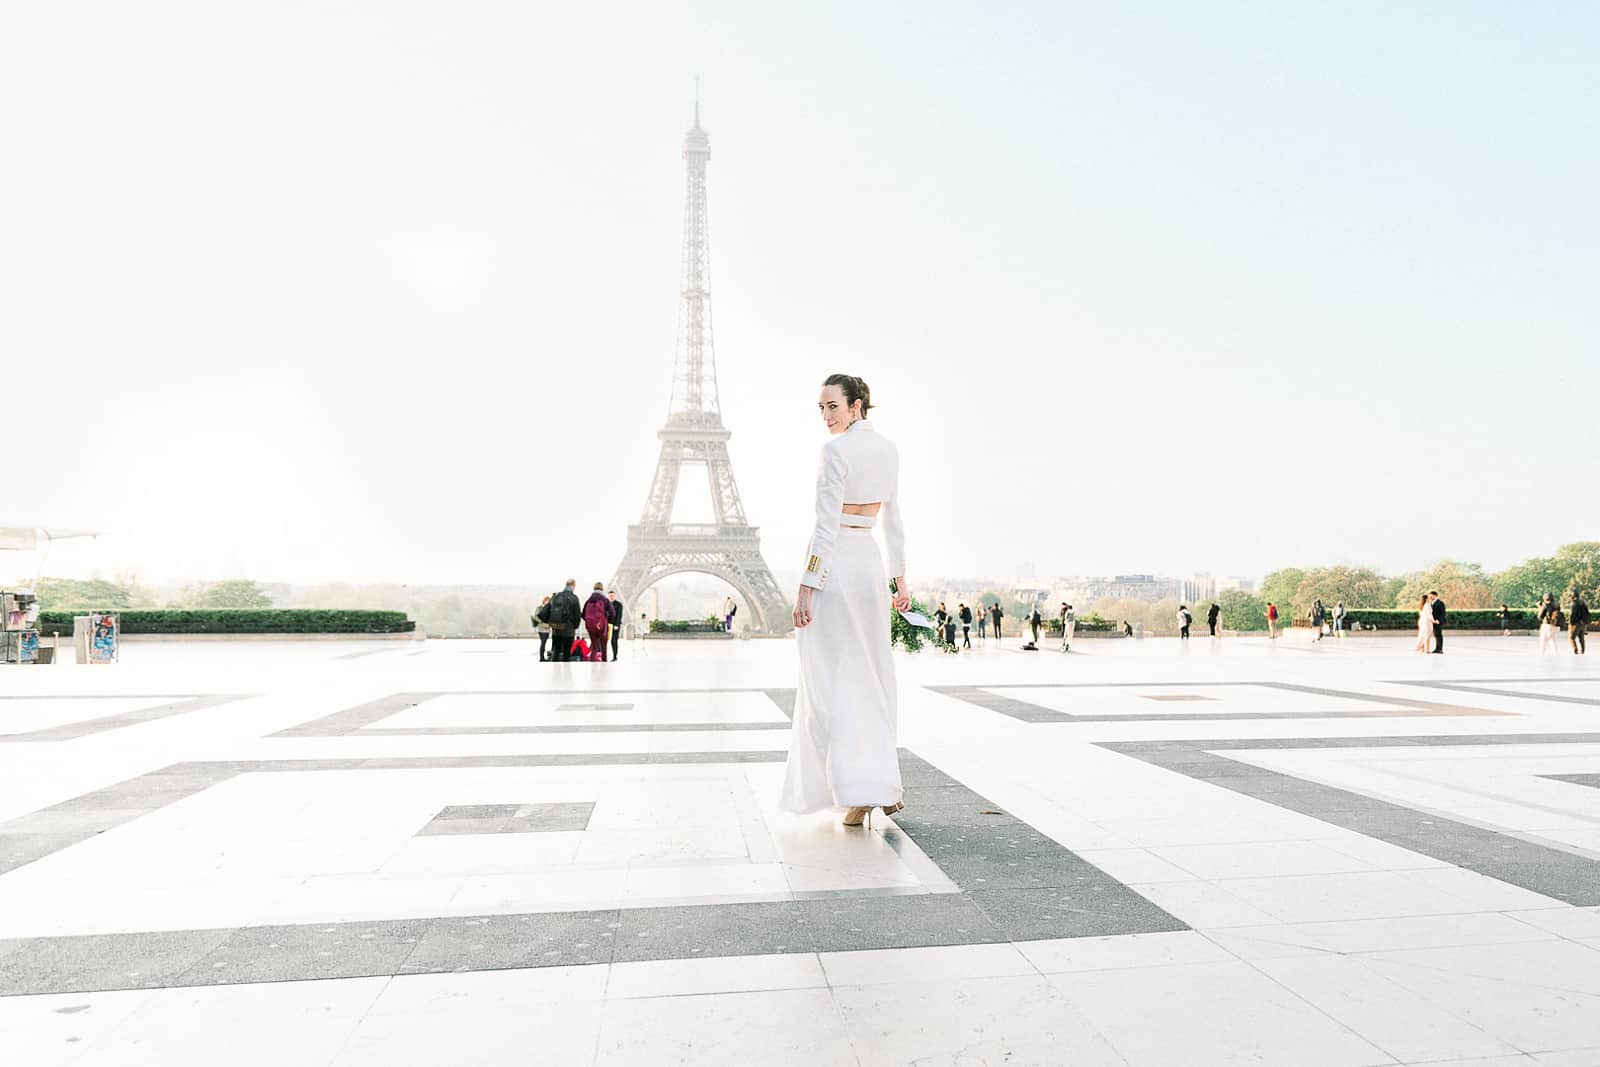 Bride in Paris, France with Eiffel Tower